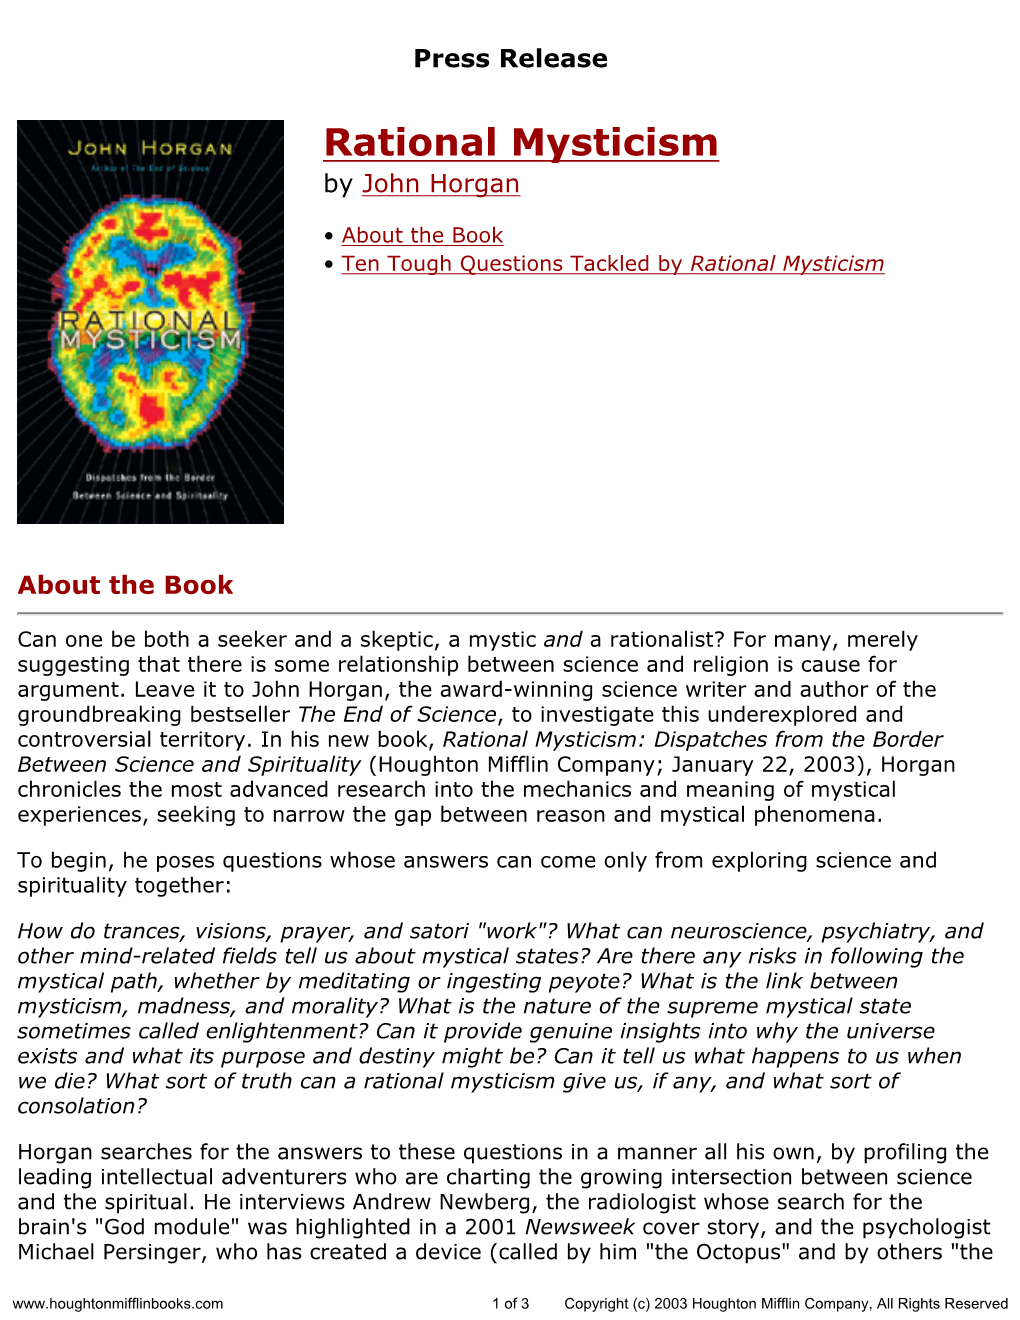 Press Release for Rational Mysticism Published by Houghton Mifflin